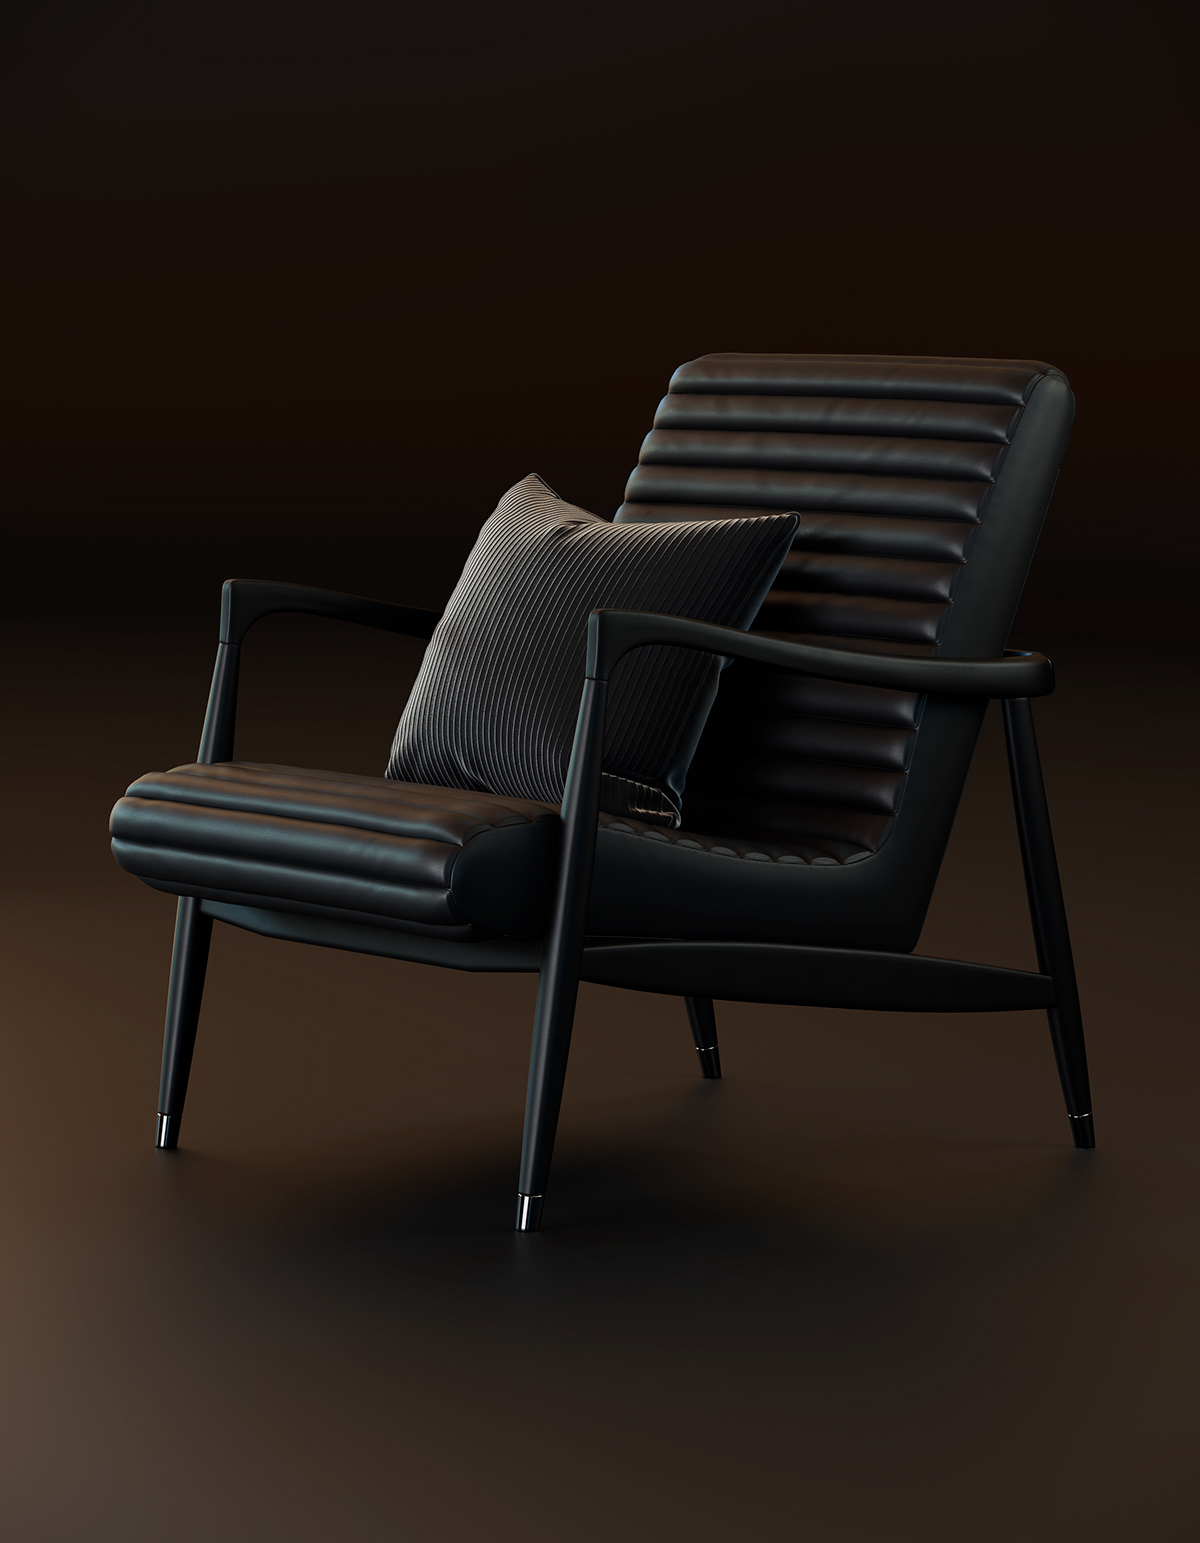 3d max 3D Visualization chairs corona render  Interior marvelous product render